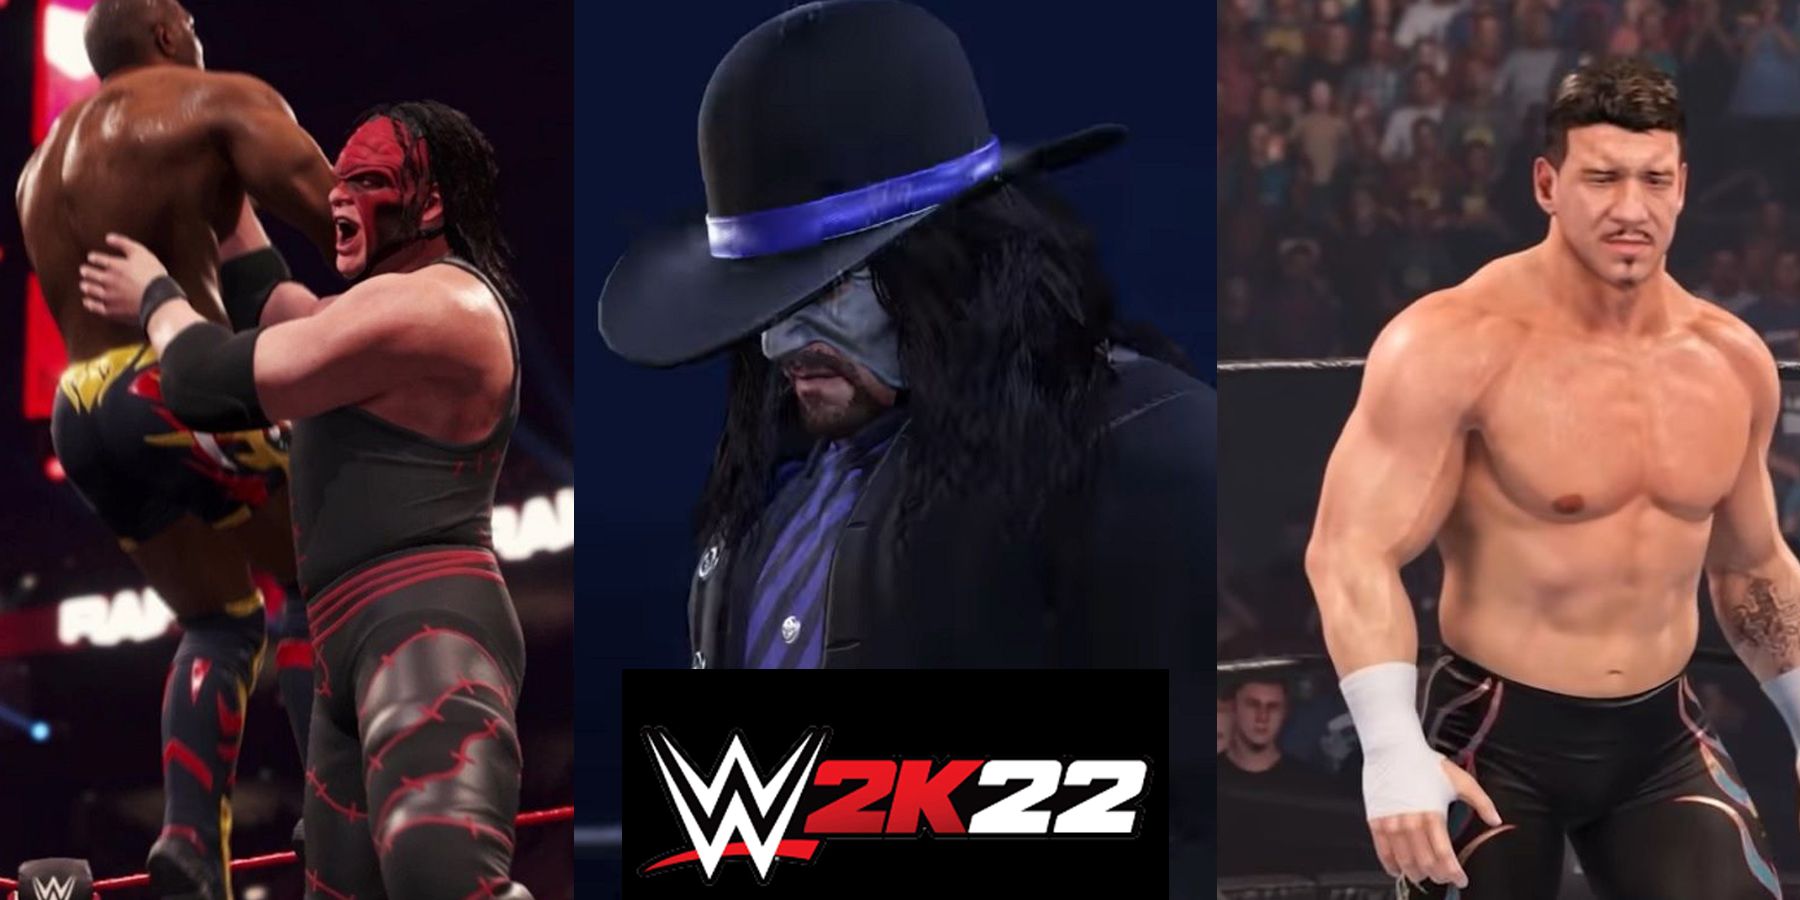 WWE 2k22 roster